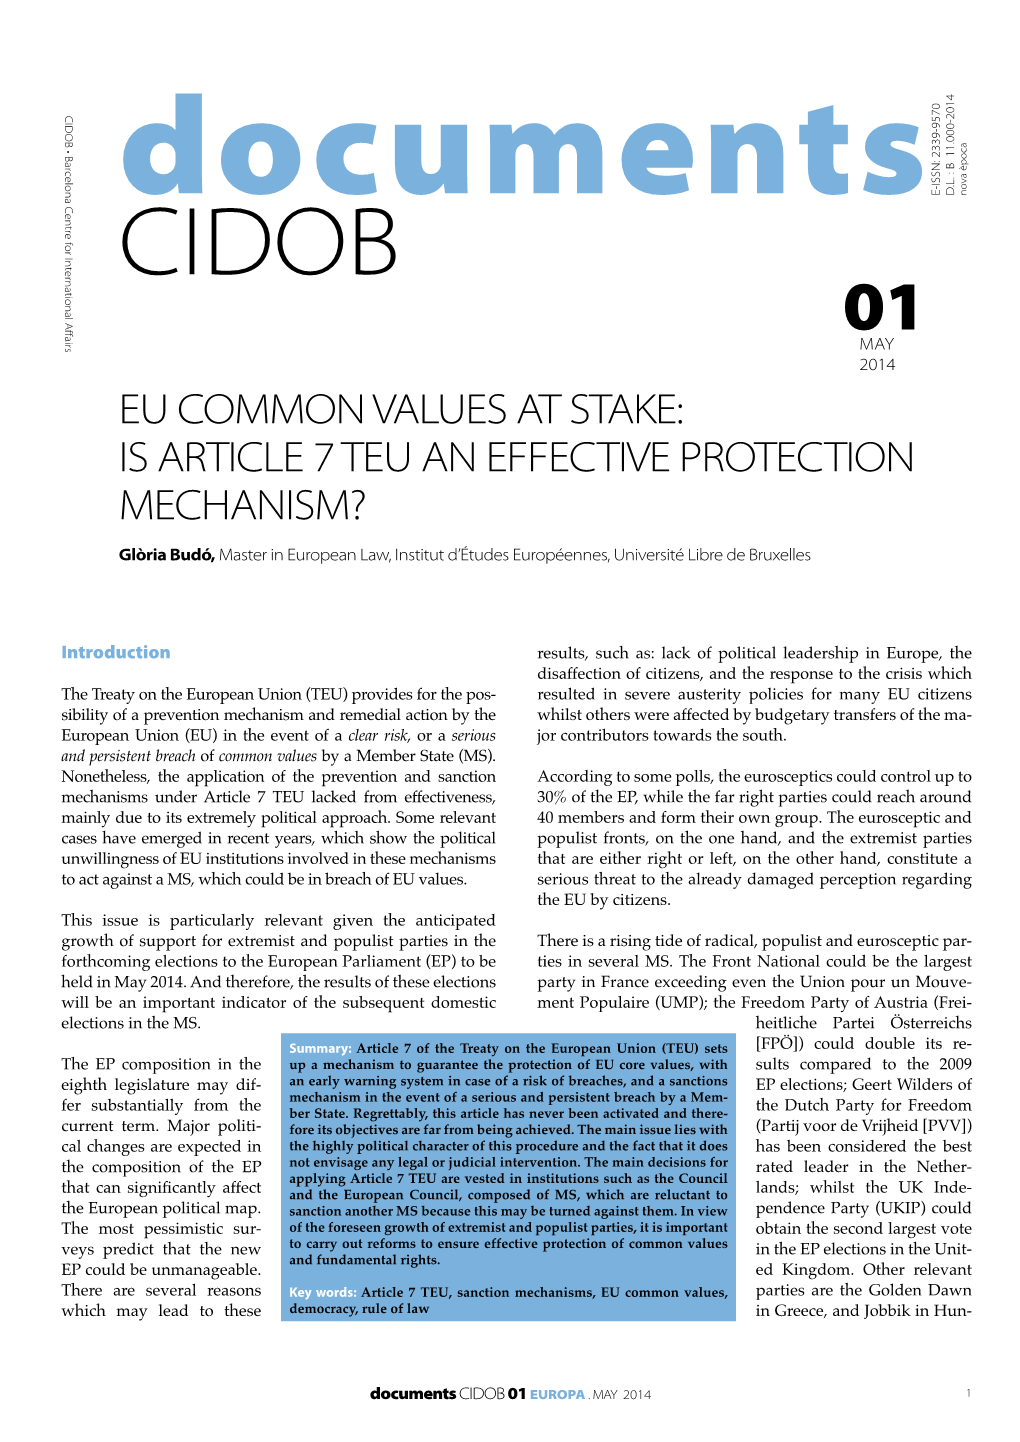 Eu Common Values at Stake: Is Article 7 Teu an Effective Protection Mechanism?